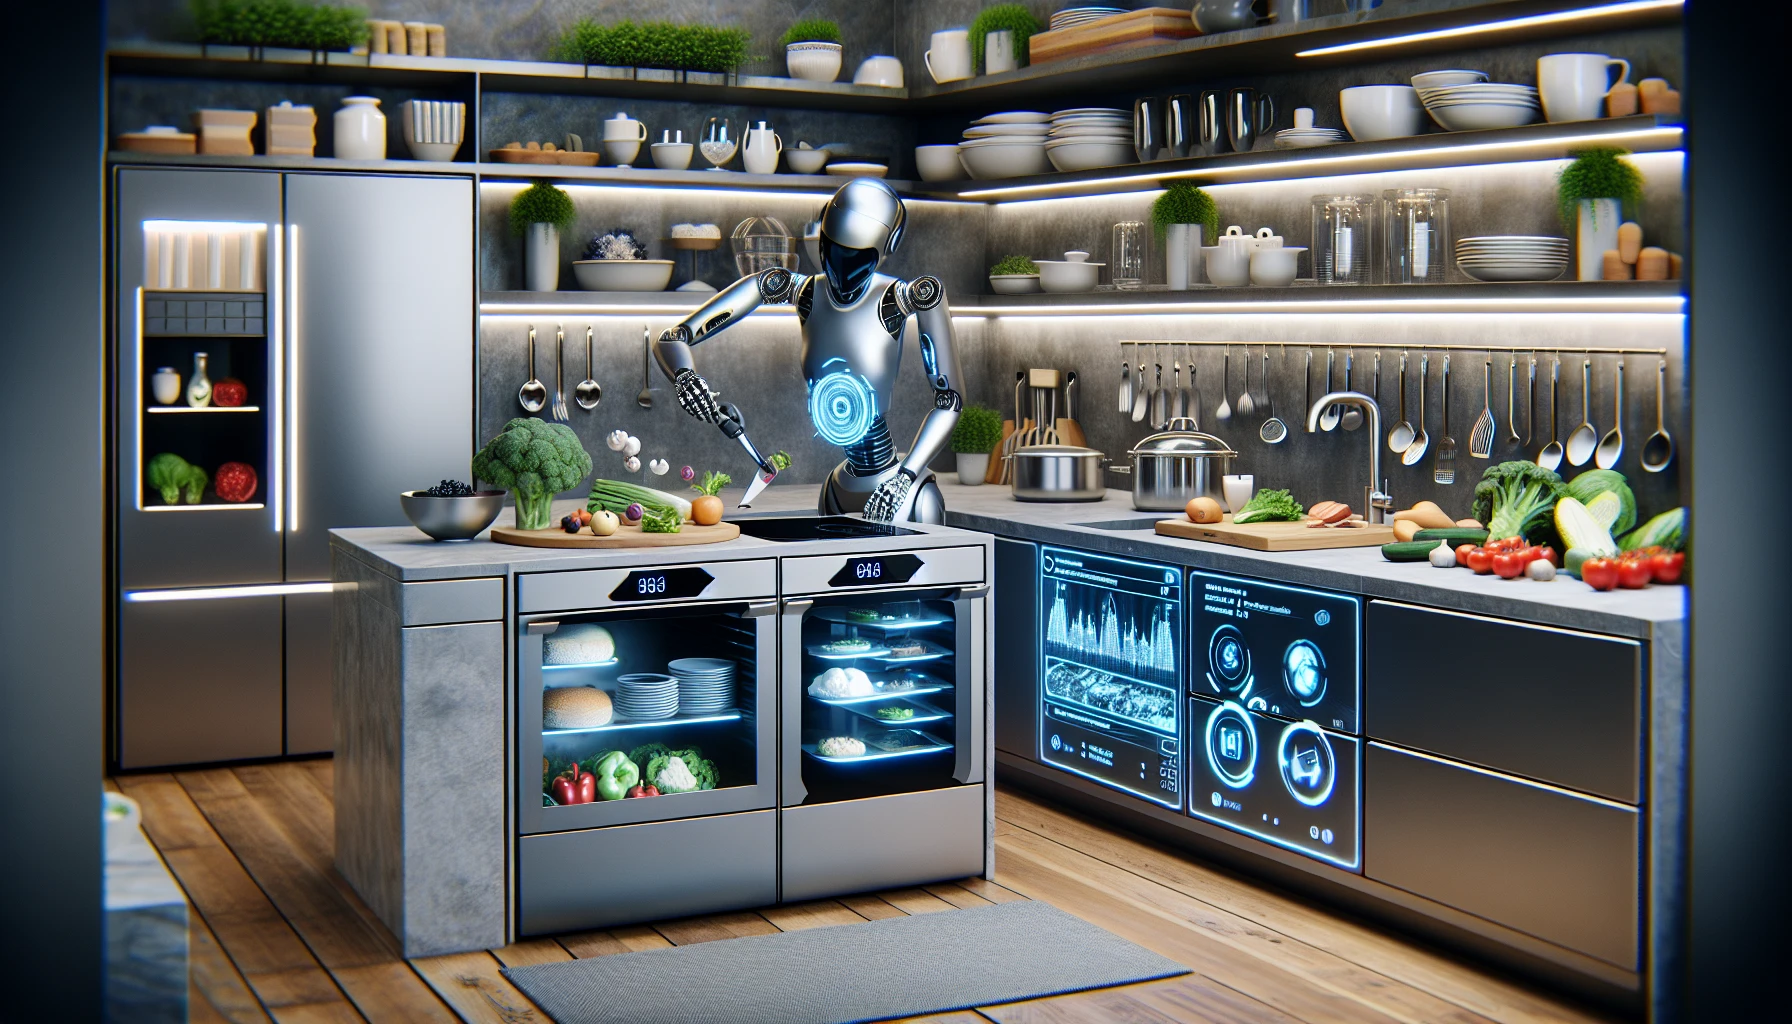 Future of AI in kitchens